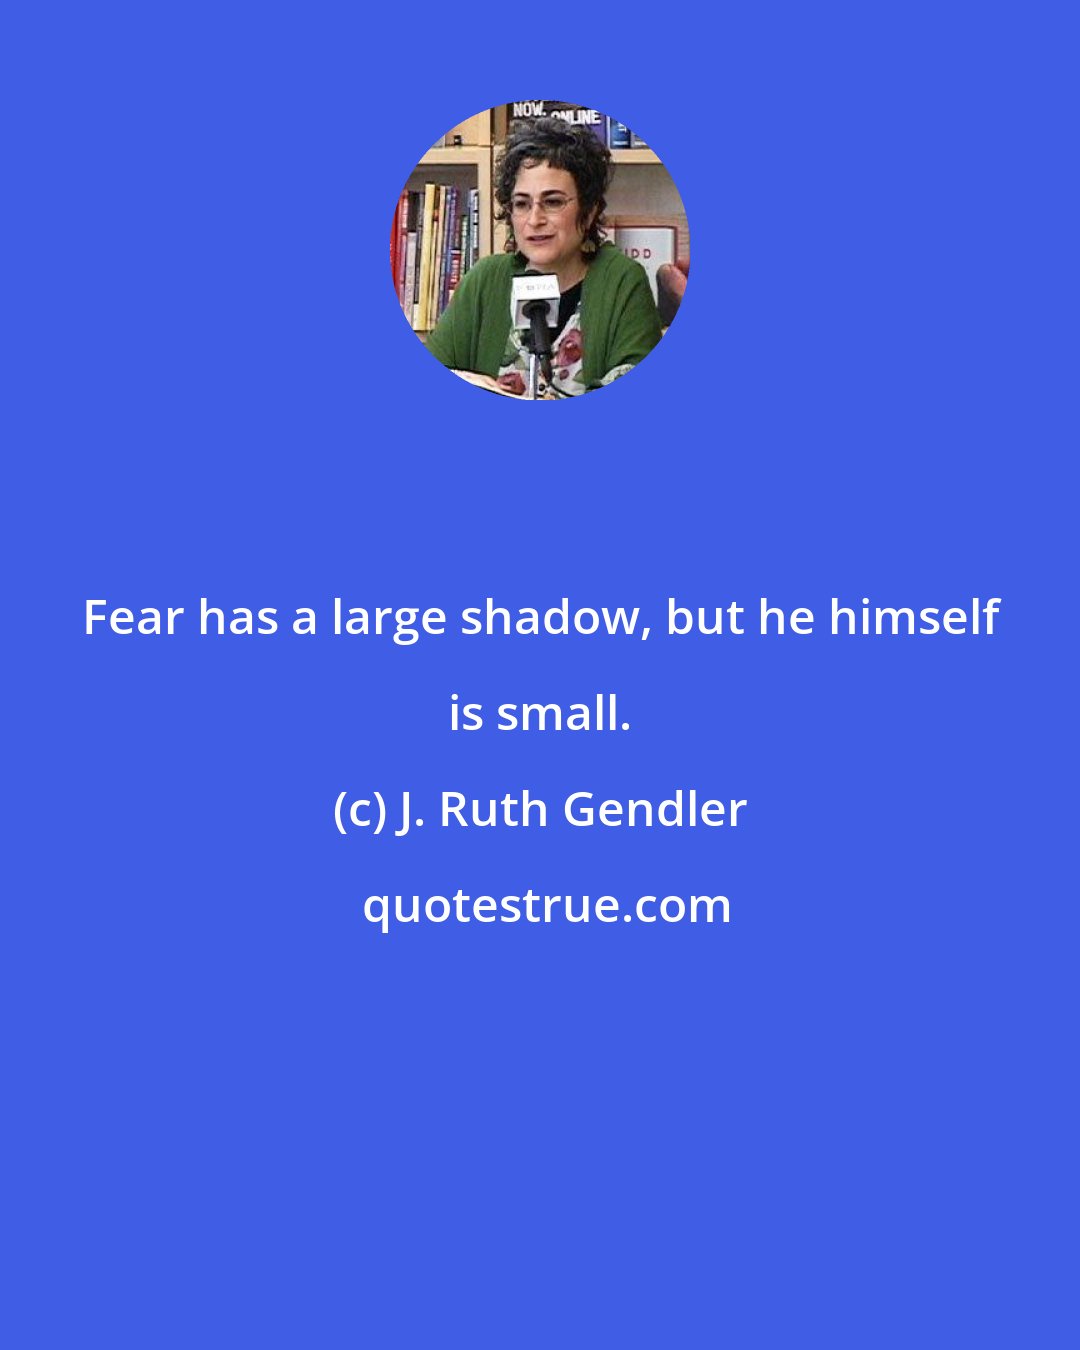 J. Ruth Gendler: Fear has a large shadow, but he himself is small.